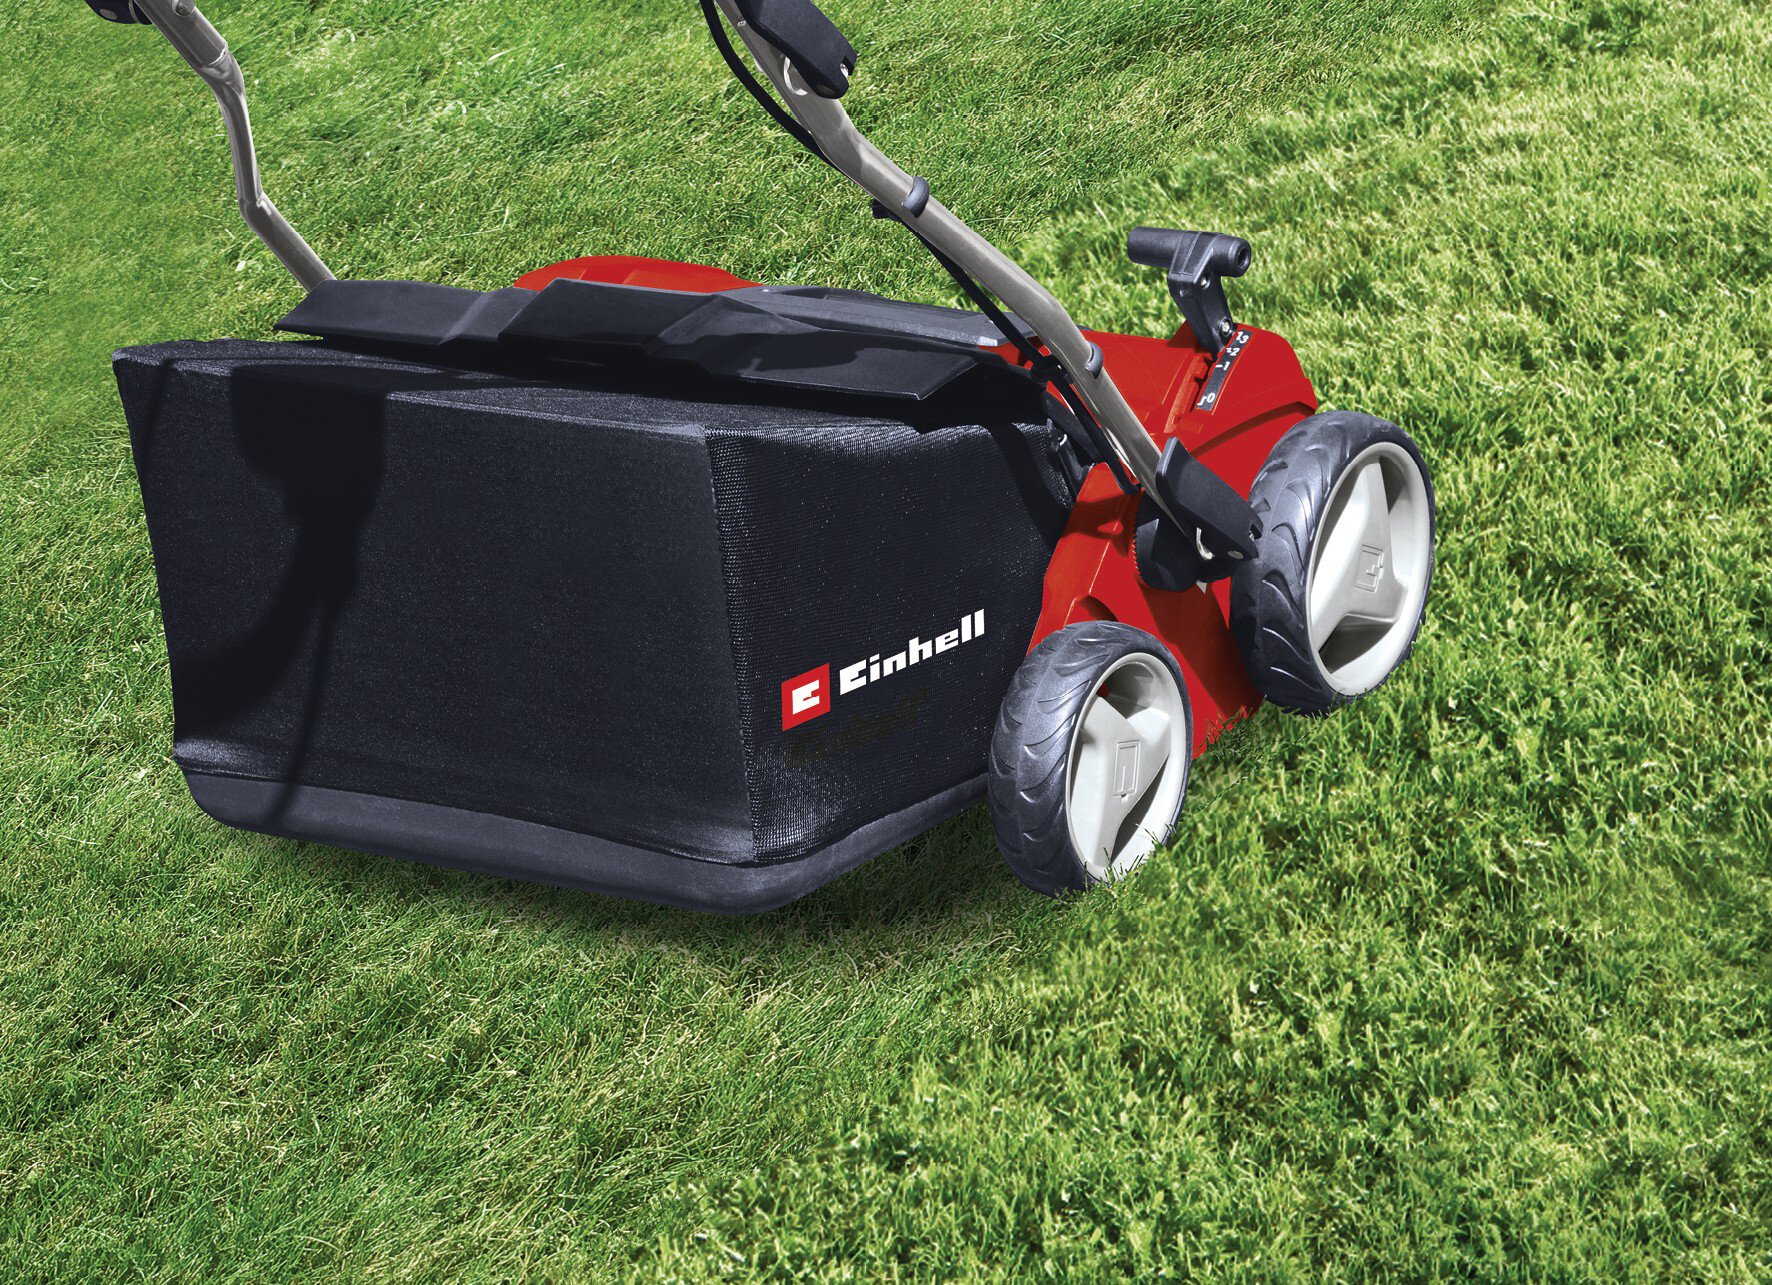 einhell-expert-electric-scarifier-lawn-aerat-3420590-example_usage-001